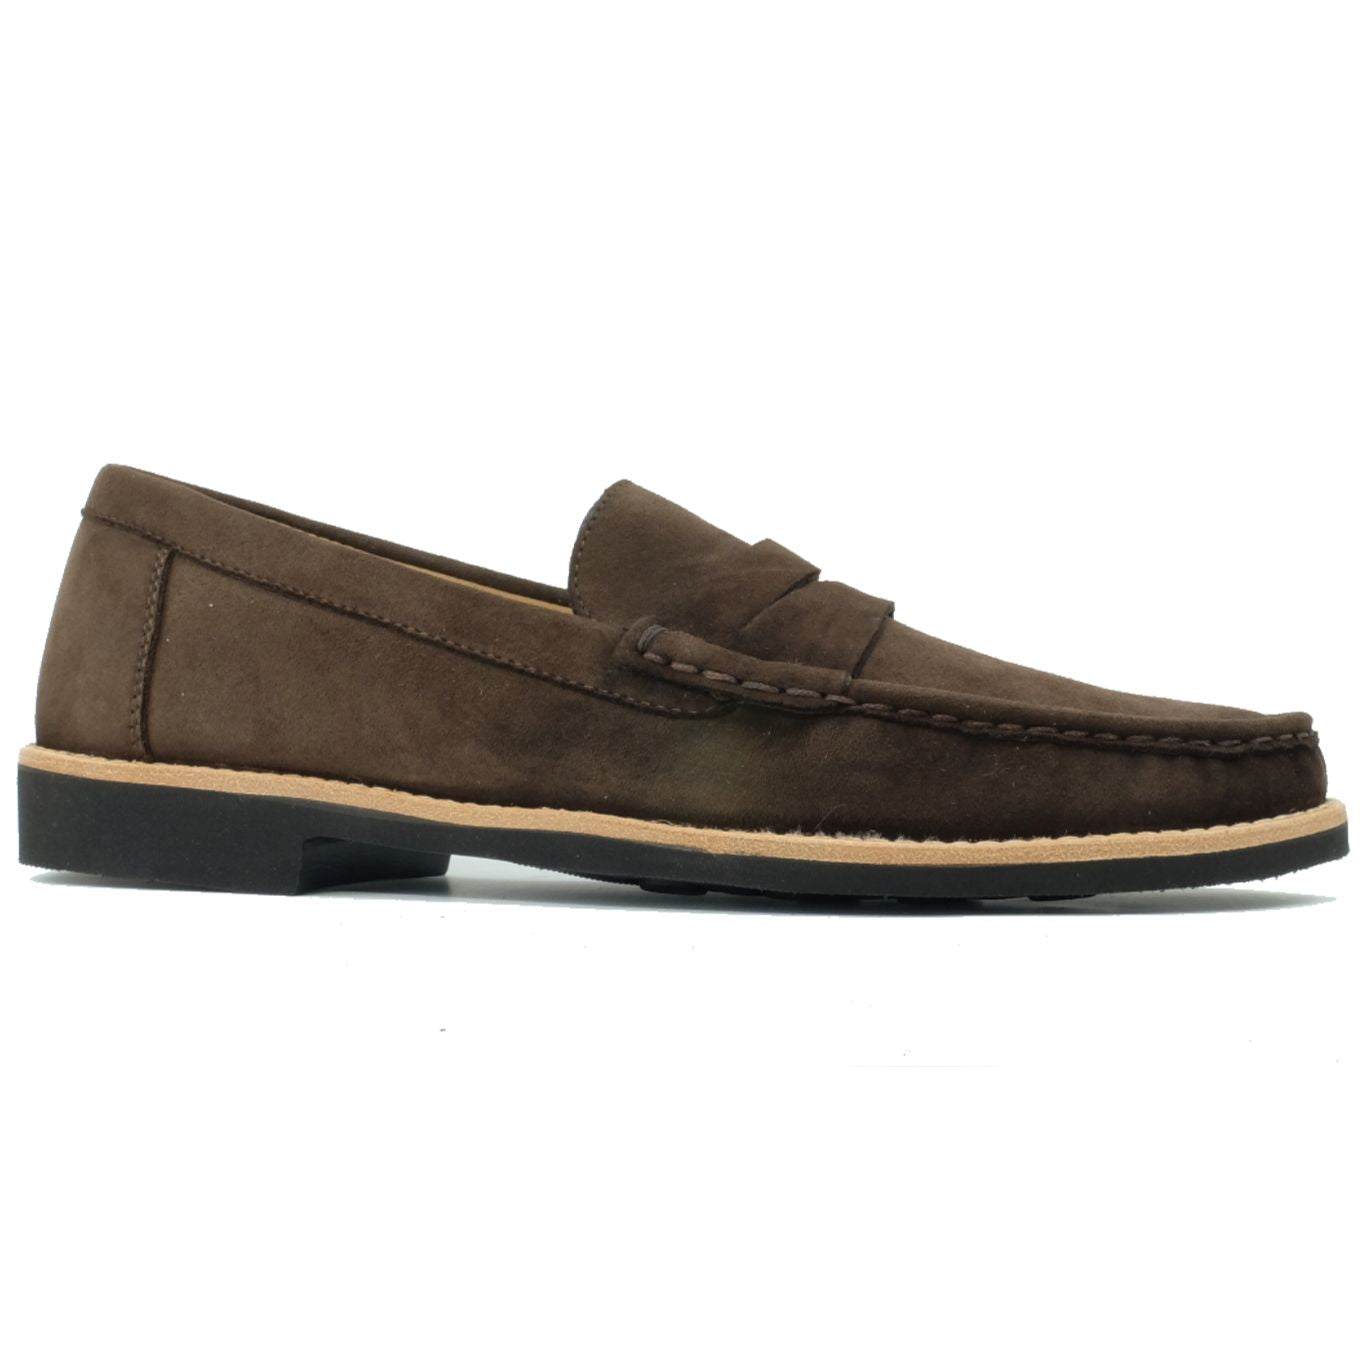 Worchester Suede Penny Loafer in Brown by Alan Payne Footwear